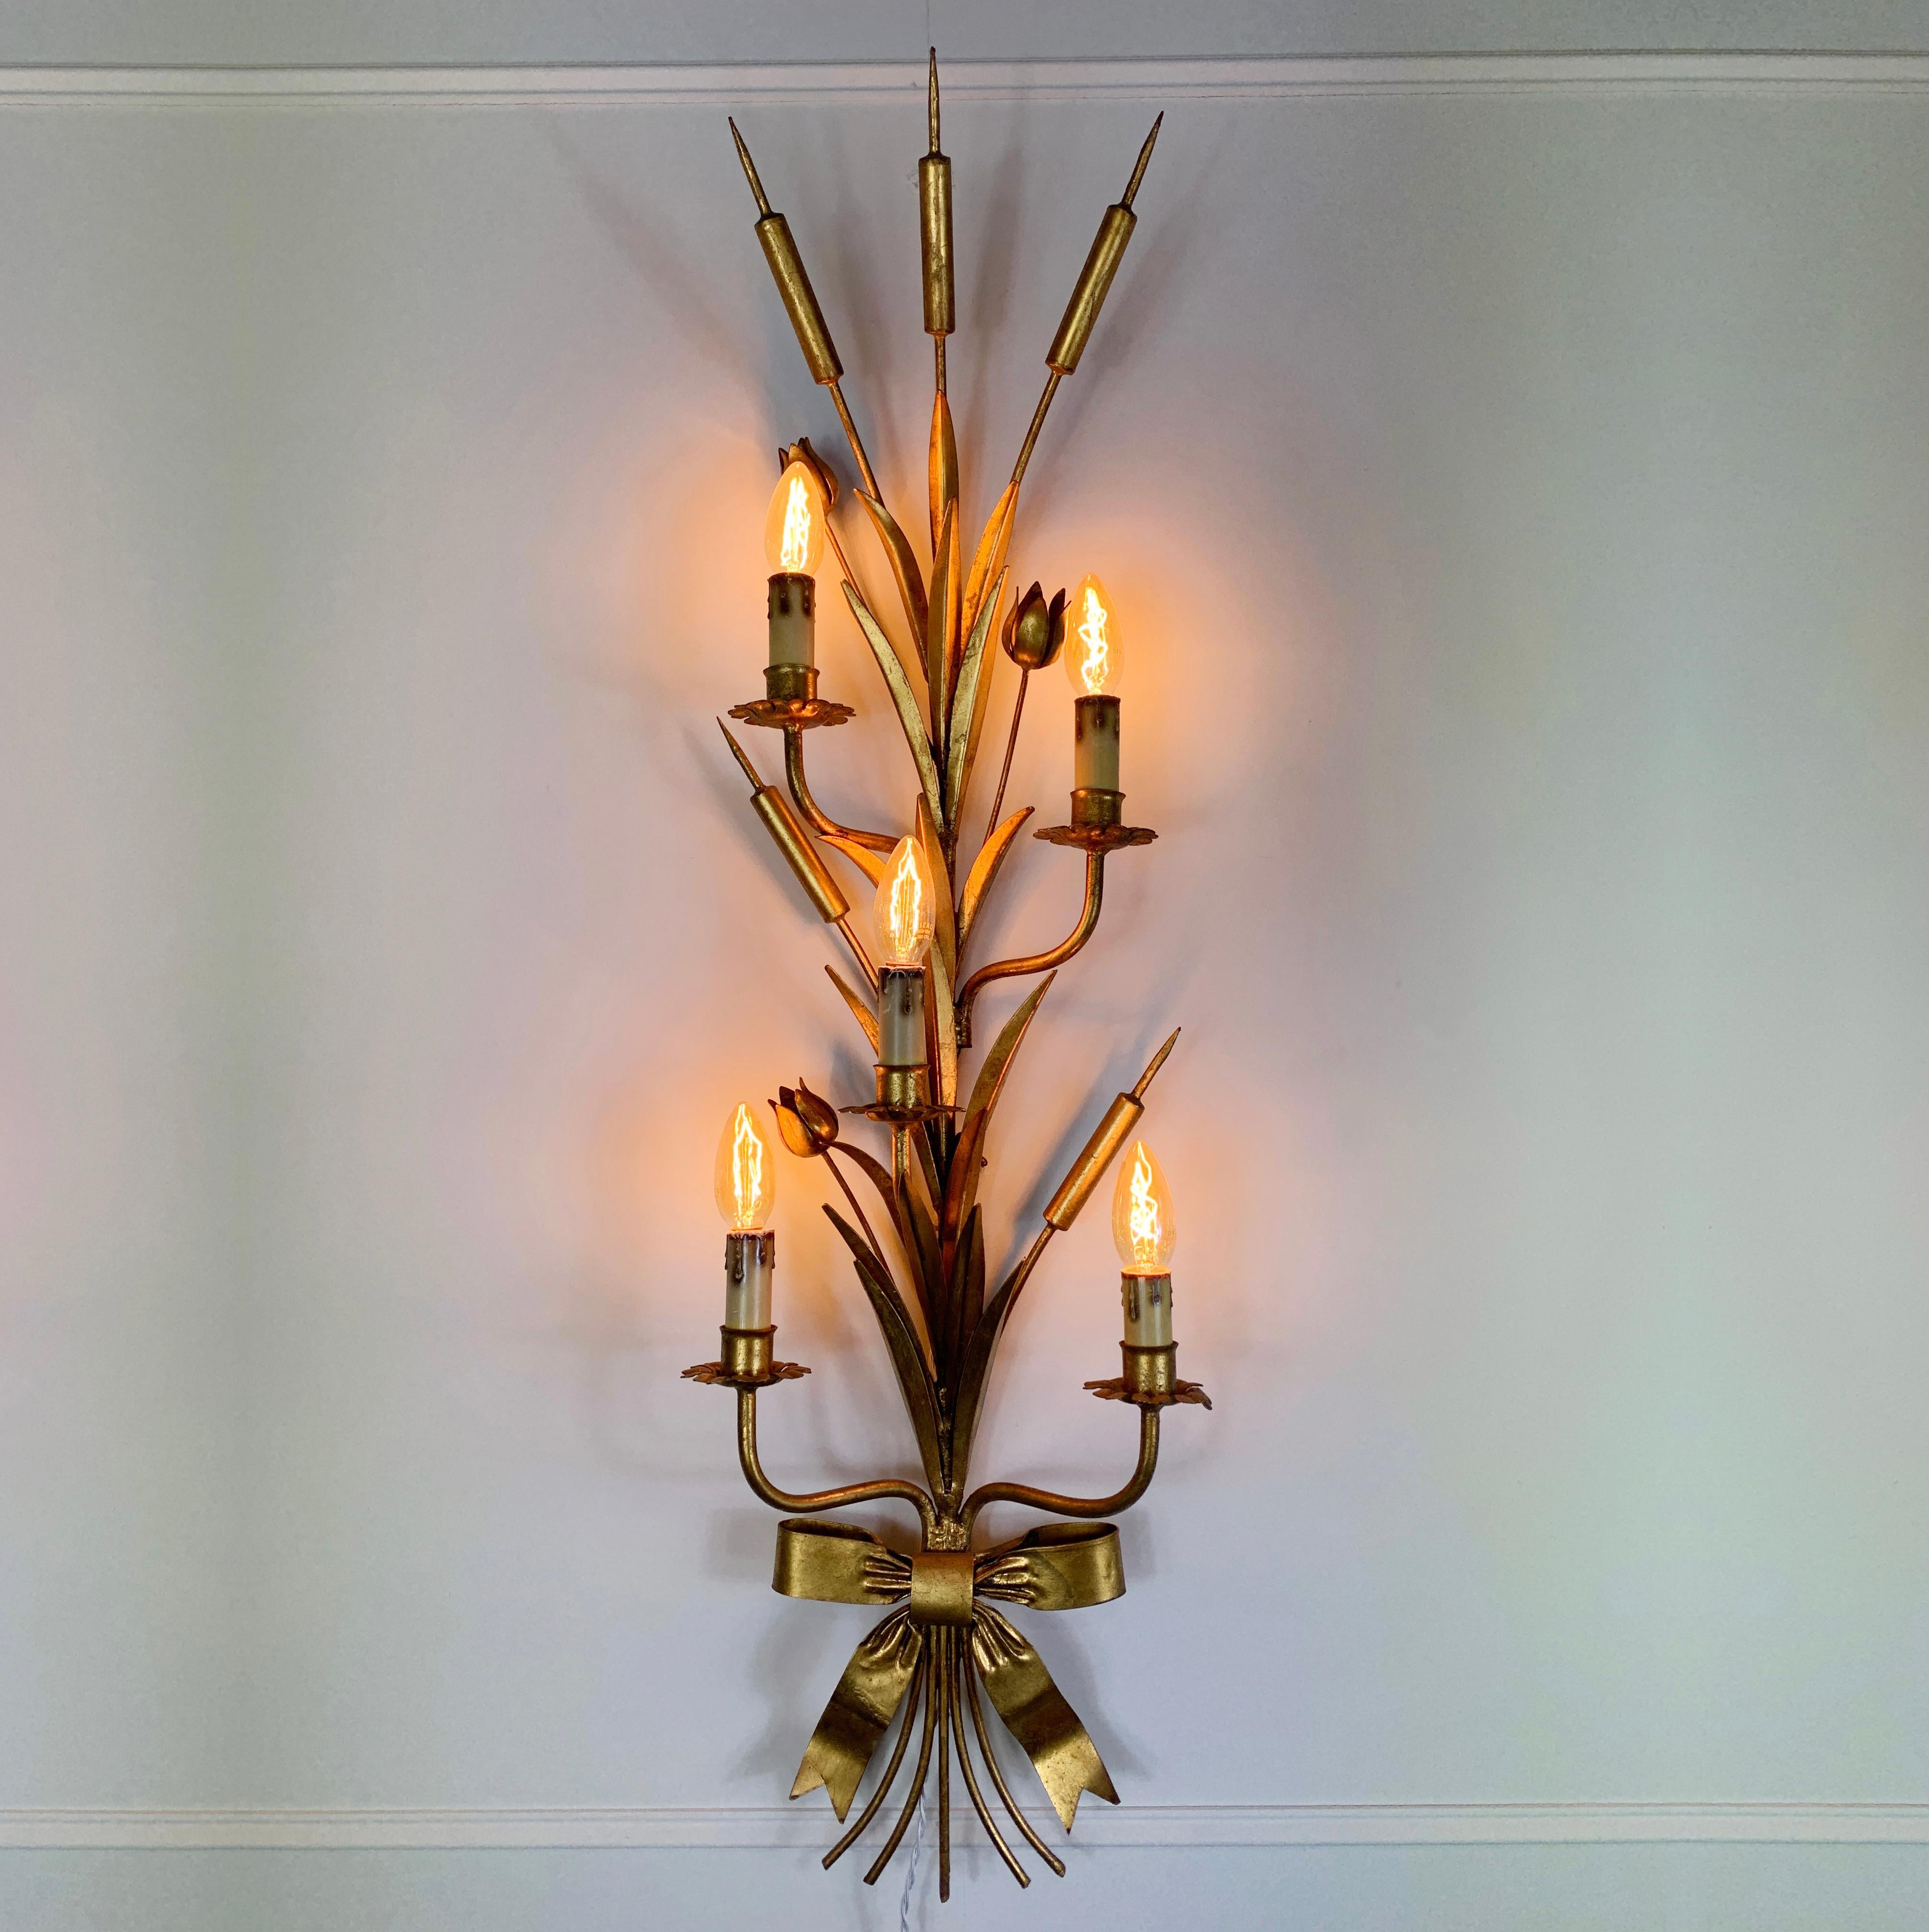 Large statement bulrush design wall sconce
Gilt metal leaves, metal flowers and bulrush stems decorate the impressive wall sconce

Mixed between the flowers and leaves are 5 arms, each with a bulb holder
The lamp takes E14 small screw in bulbs x